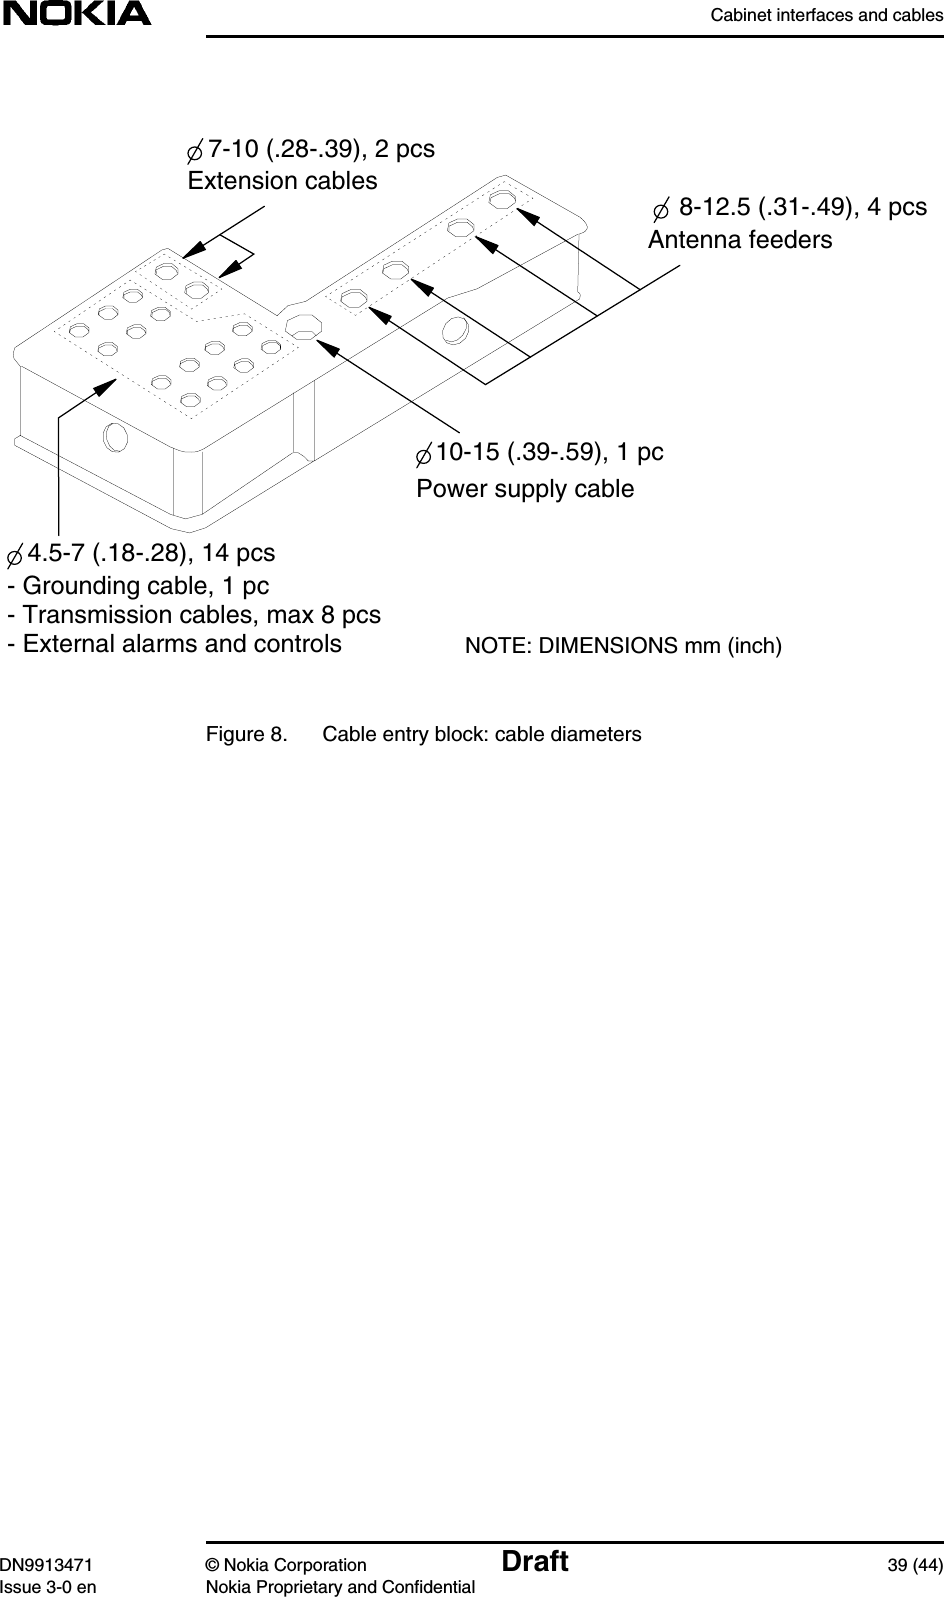 Cabinet interfaces and cablesDN9913471 © Nokia Corporation Draft 39 (44)Issue 3-0 en Nokia Proprietary and ConfidentialFigure 8. Cable entry block: cable diameters 4.5-7 (.18-.28), 14 pcs 7-10 (.28-.39), 2 pcs10-15 (.39-.59), 1 pcNOTE: DIMENSIONS mm (inch)Extension cablesPower supply cableAntenna feeders- Grounding cable, 1 pc- Transmission cables, max 8 pcs- External alarms and controls 8-12.5 (.31-.49), 4 pcs